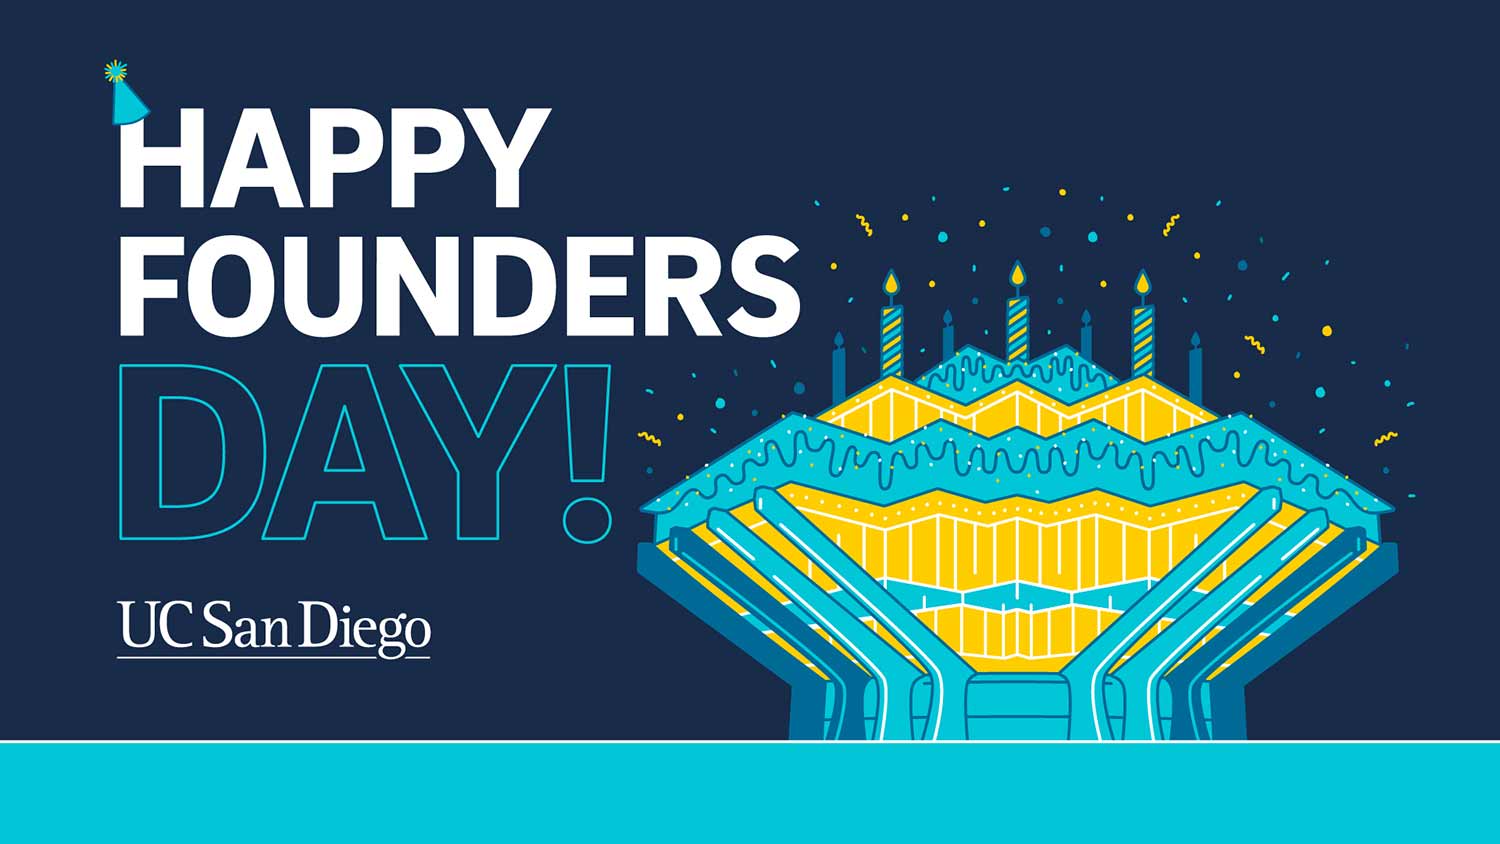 Happy Founders Day from UC San Diego